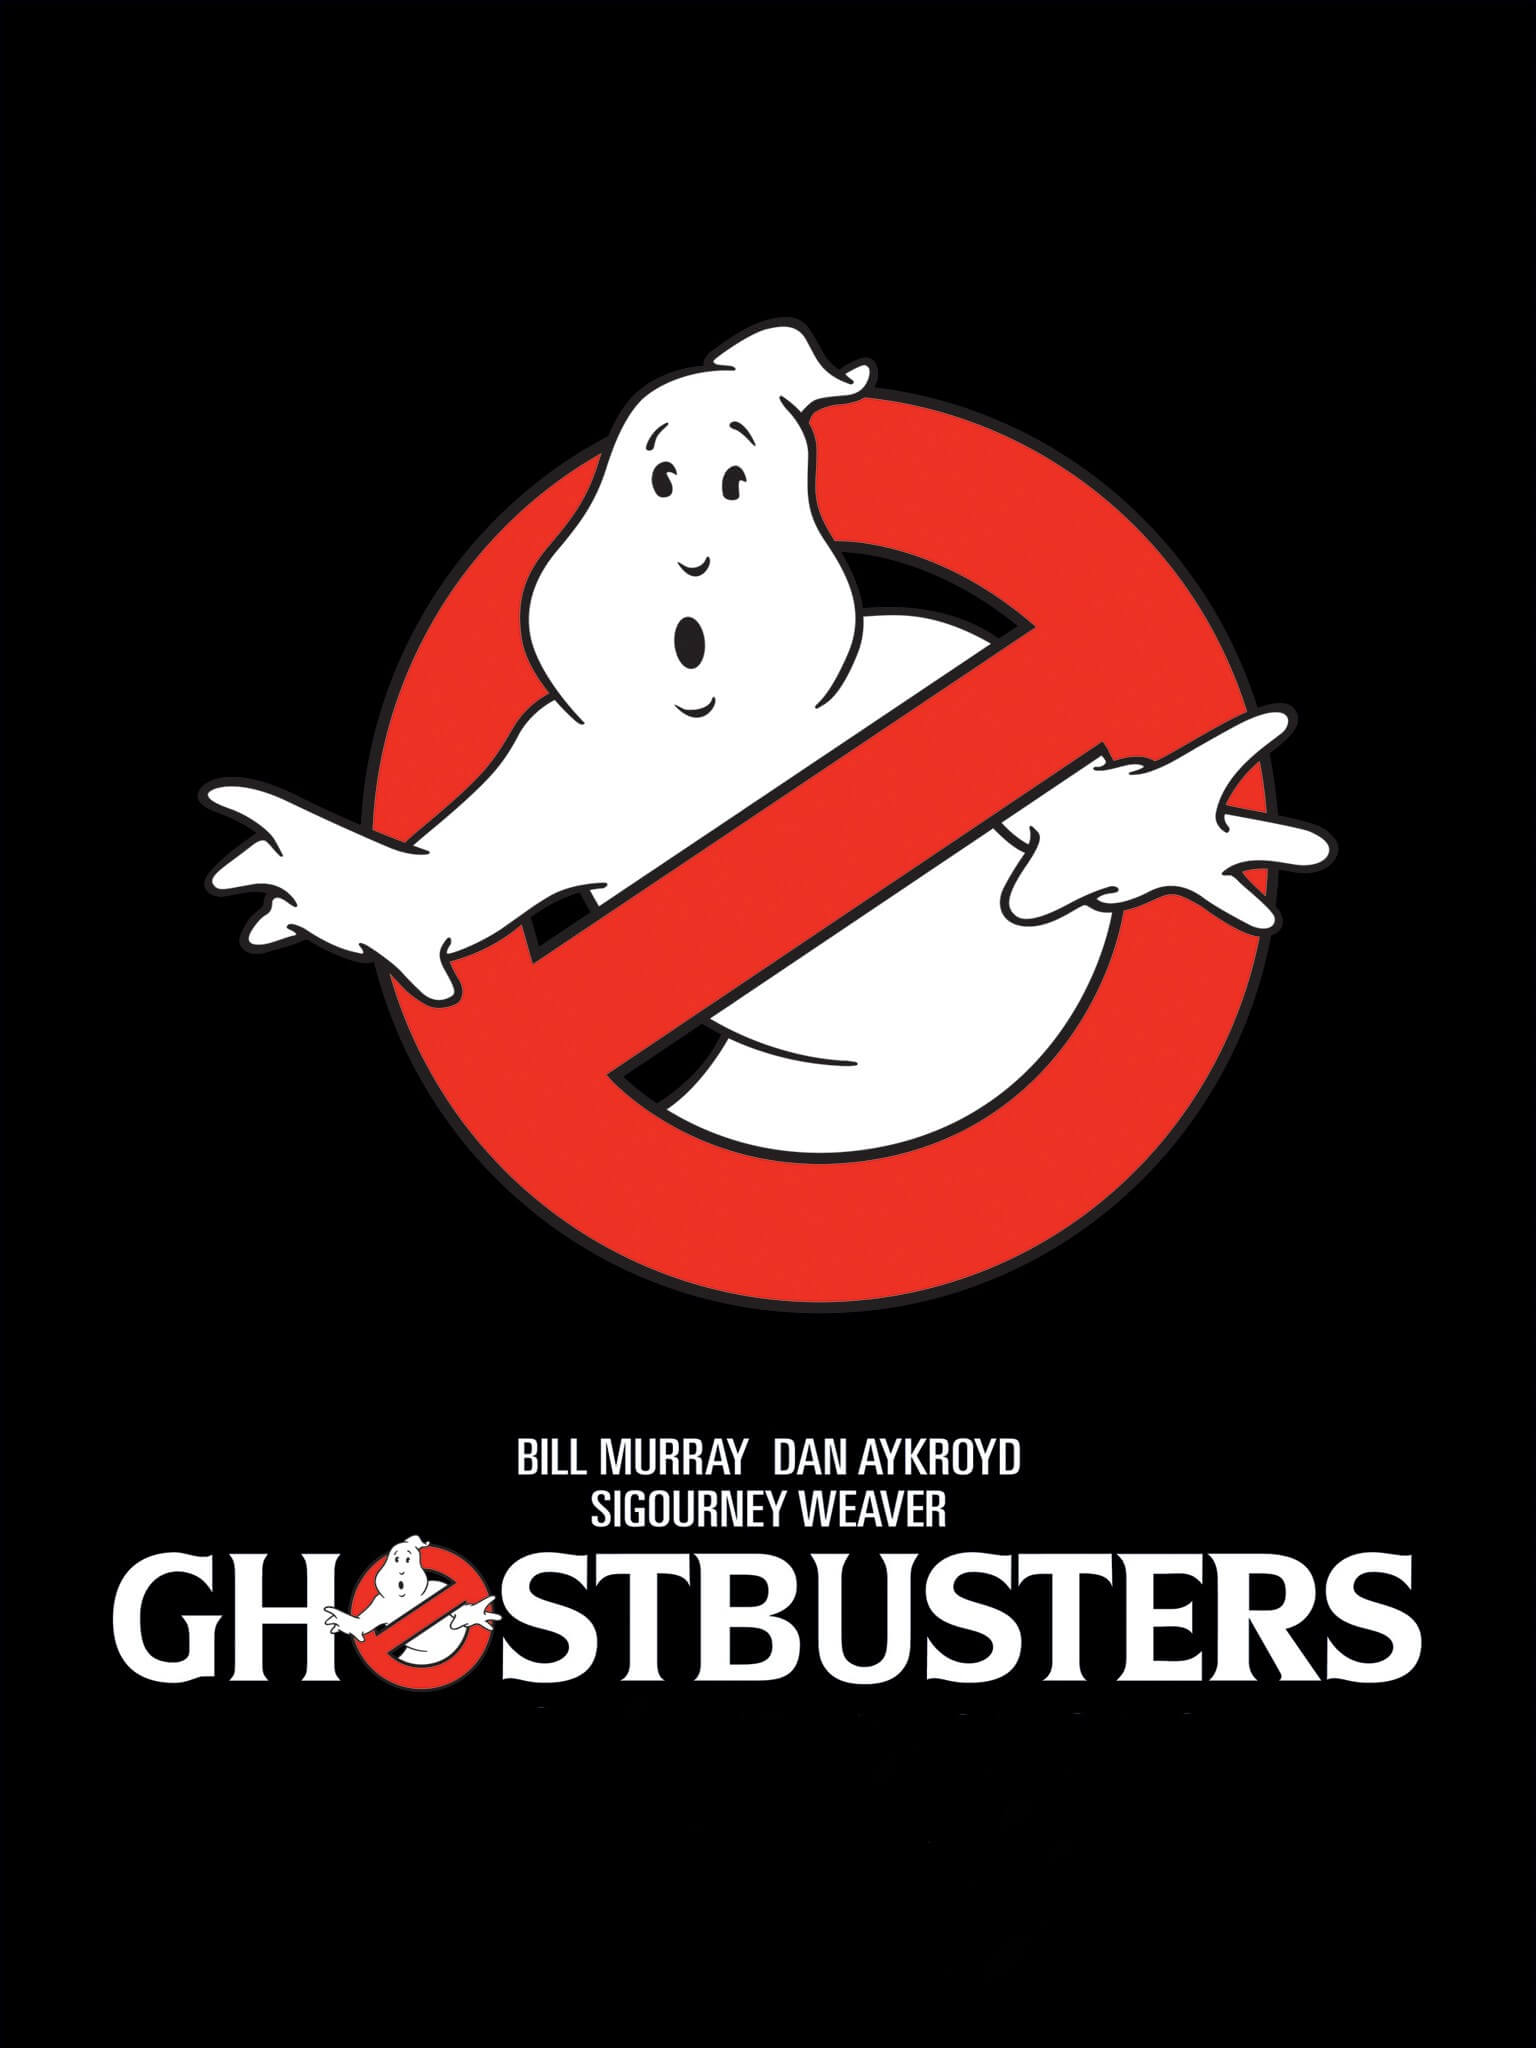 Ghostbusters symbol of ghost in a red circle with a line through it